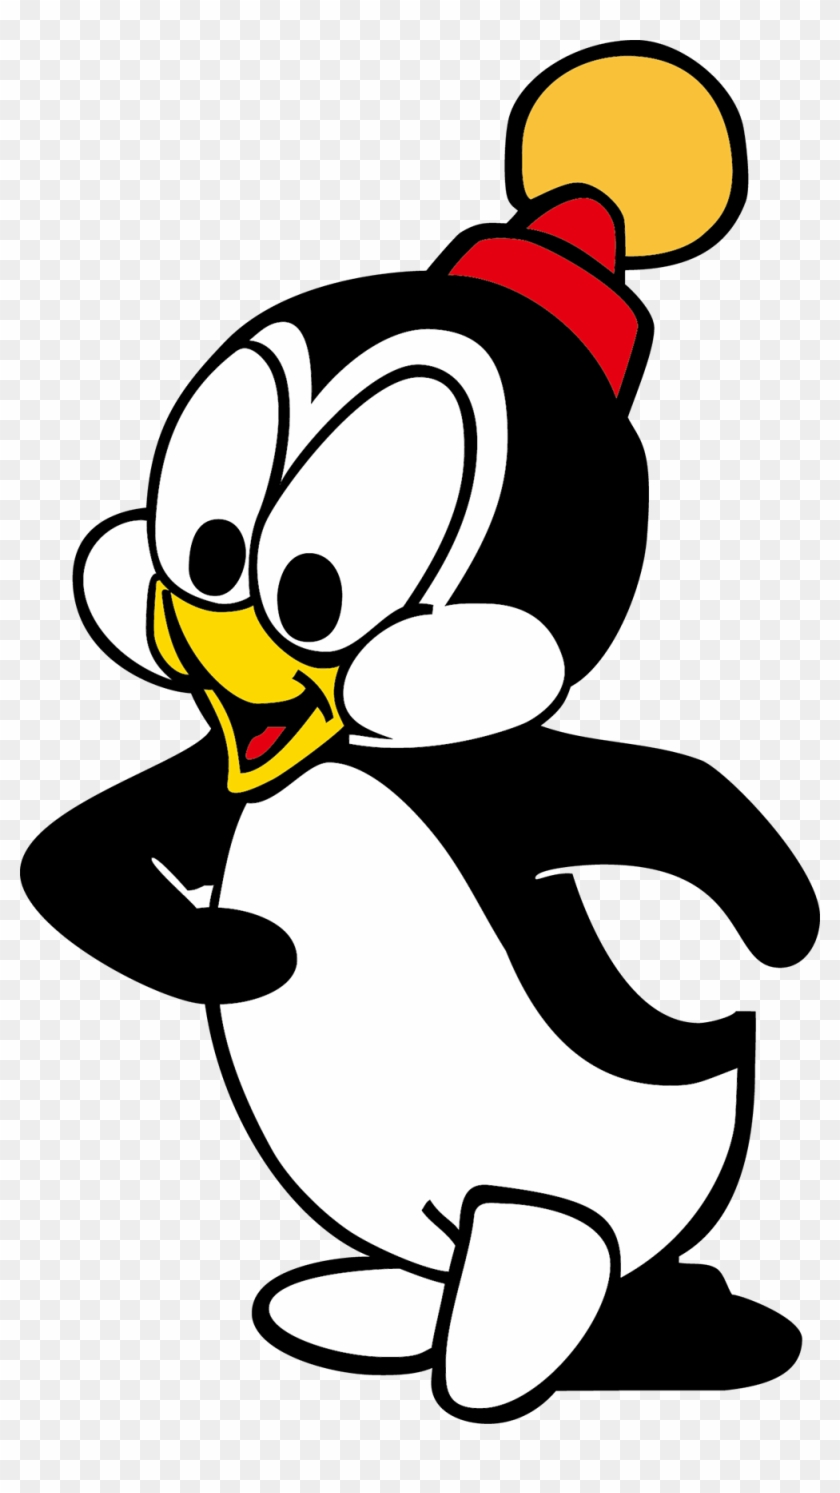 Chilly Willy Woody Woodpecker Penguin Logo Clip Art - Chilly Willy Png #824619